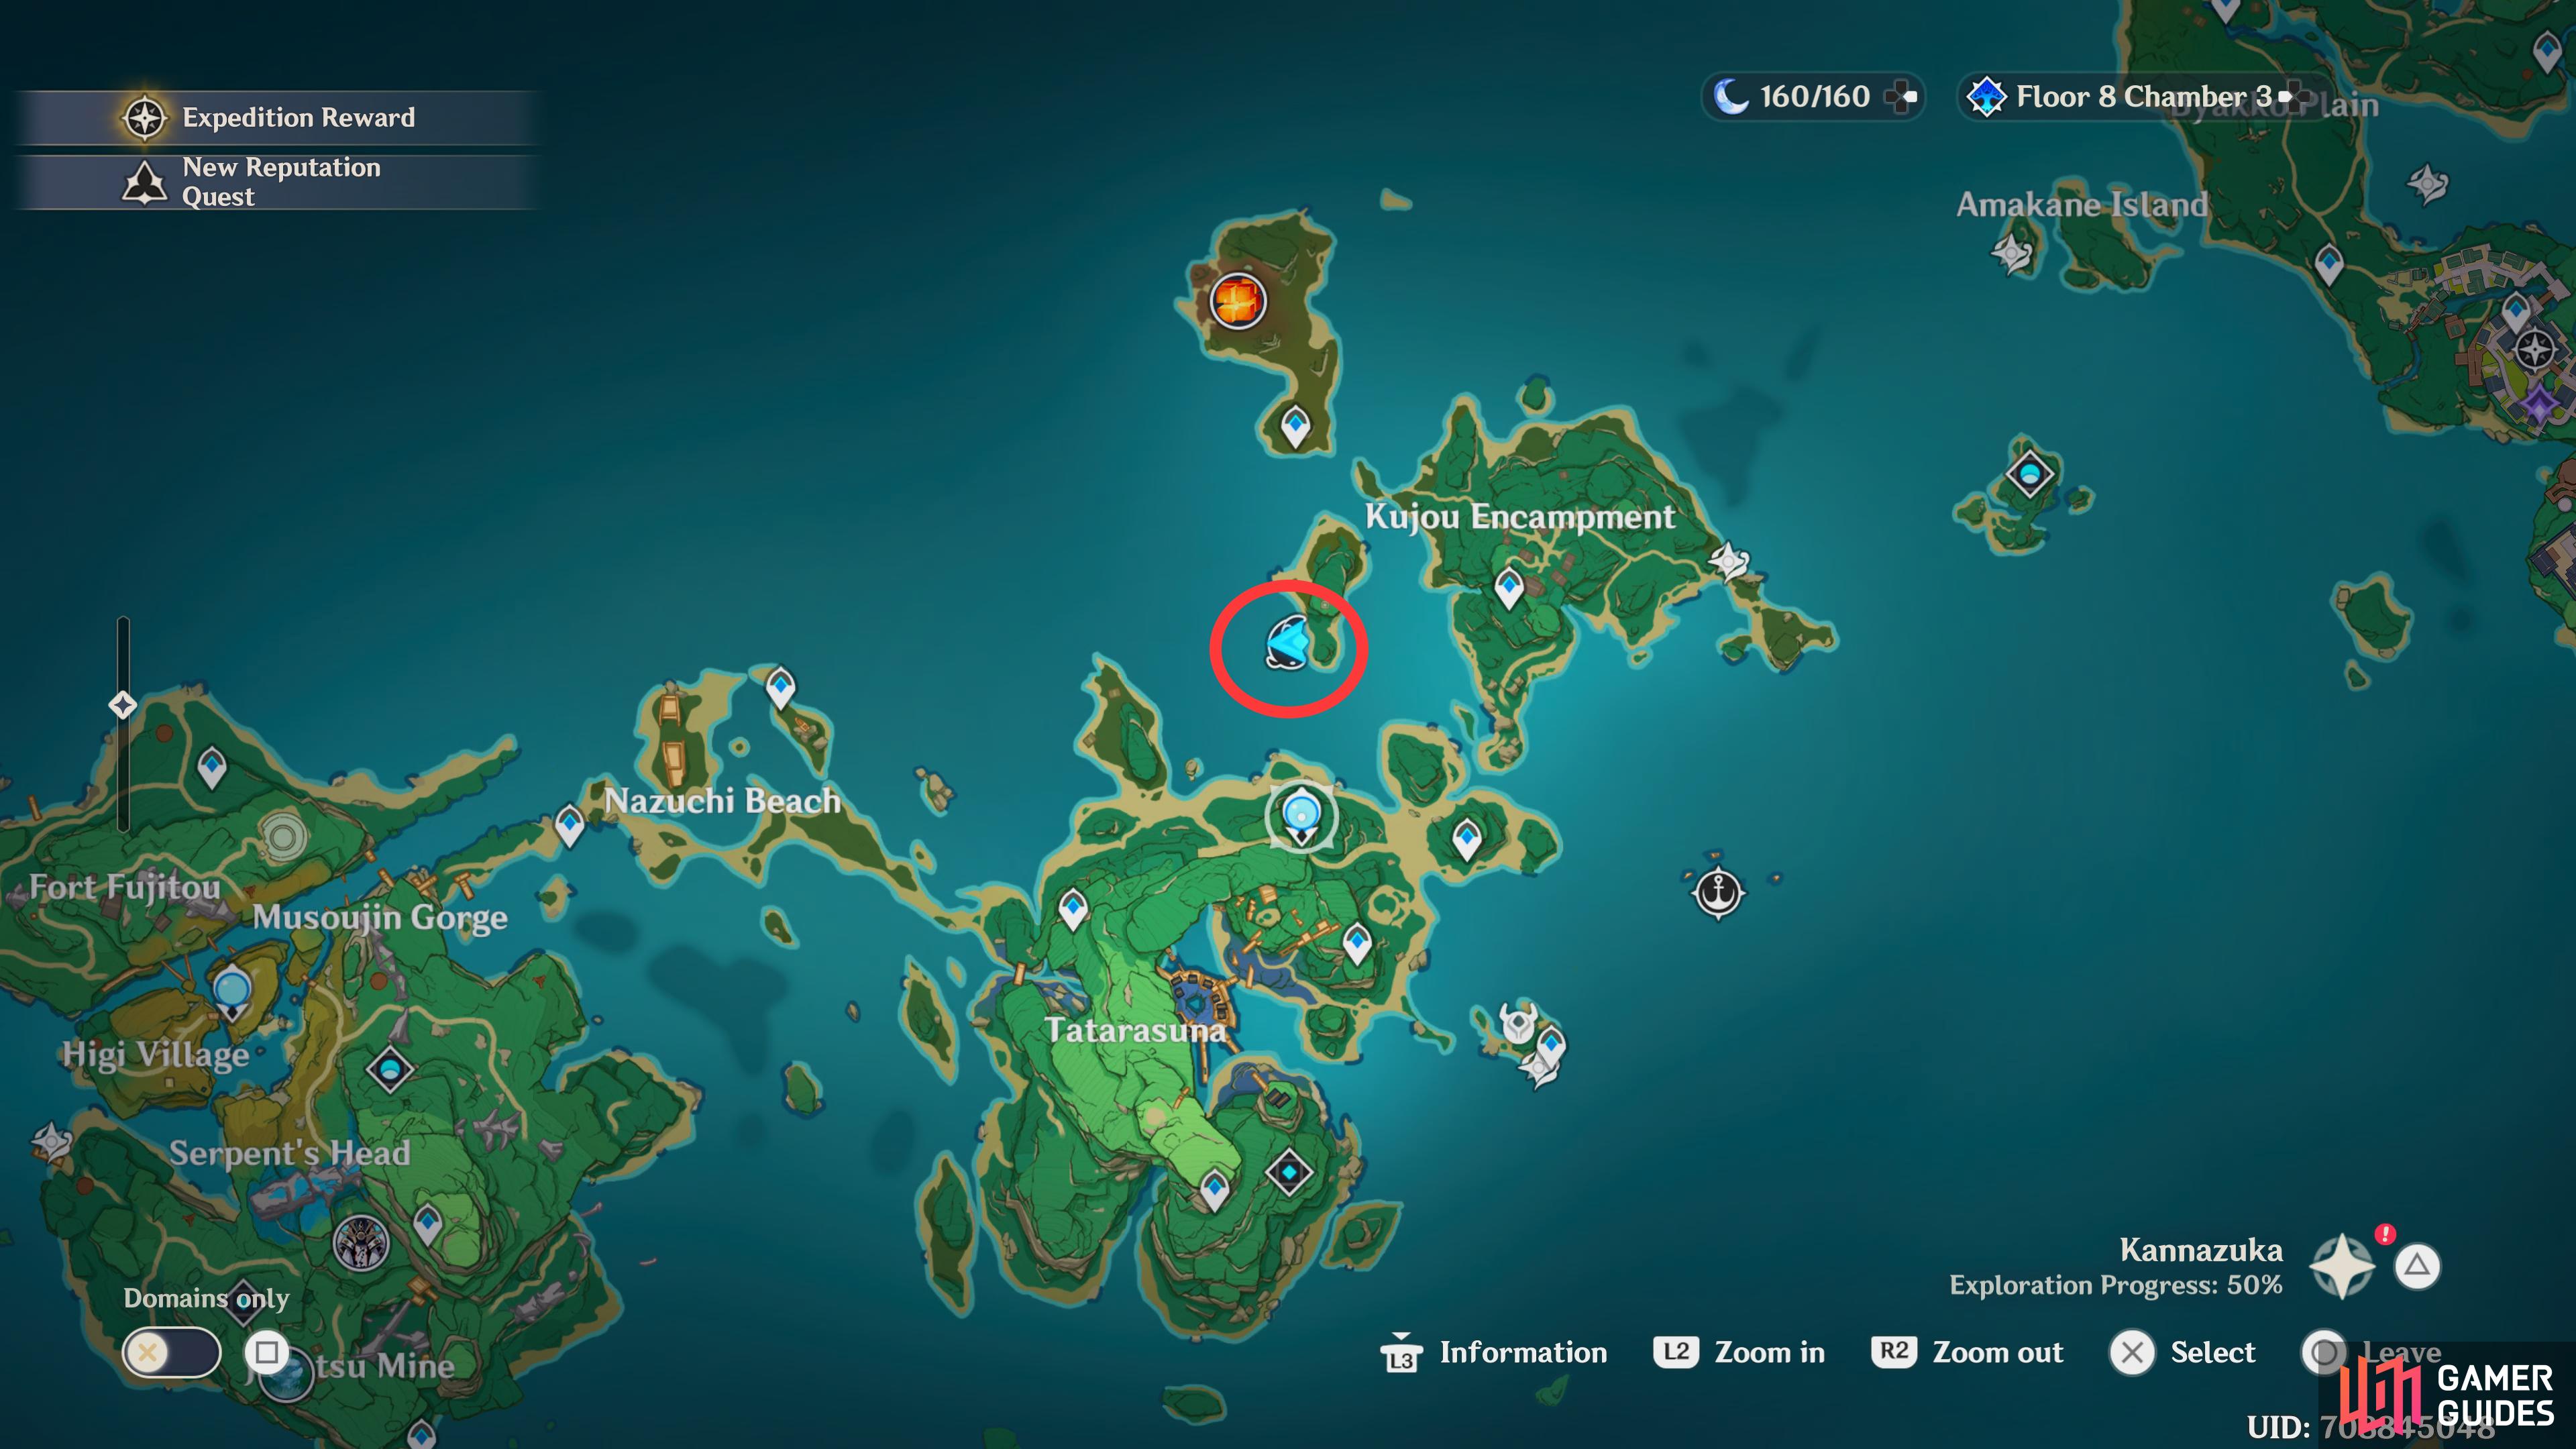 The Day 4 challenge can be found on a small island north of Tatarasuna, west of the Kujou Encampment.